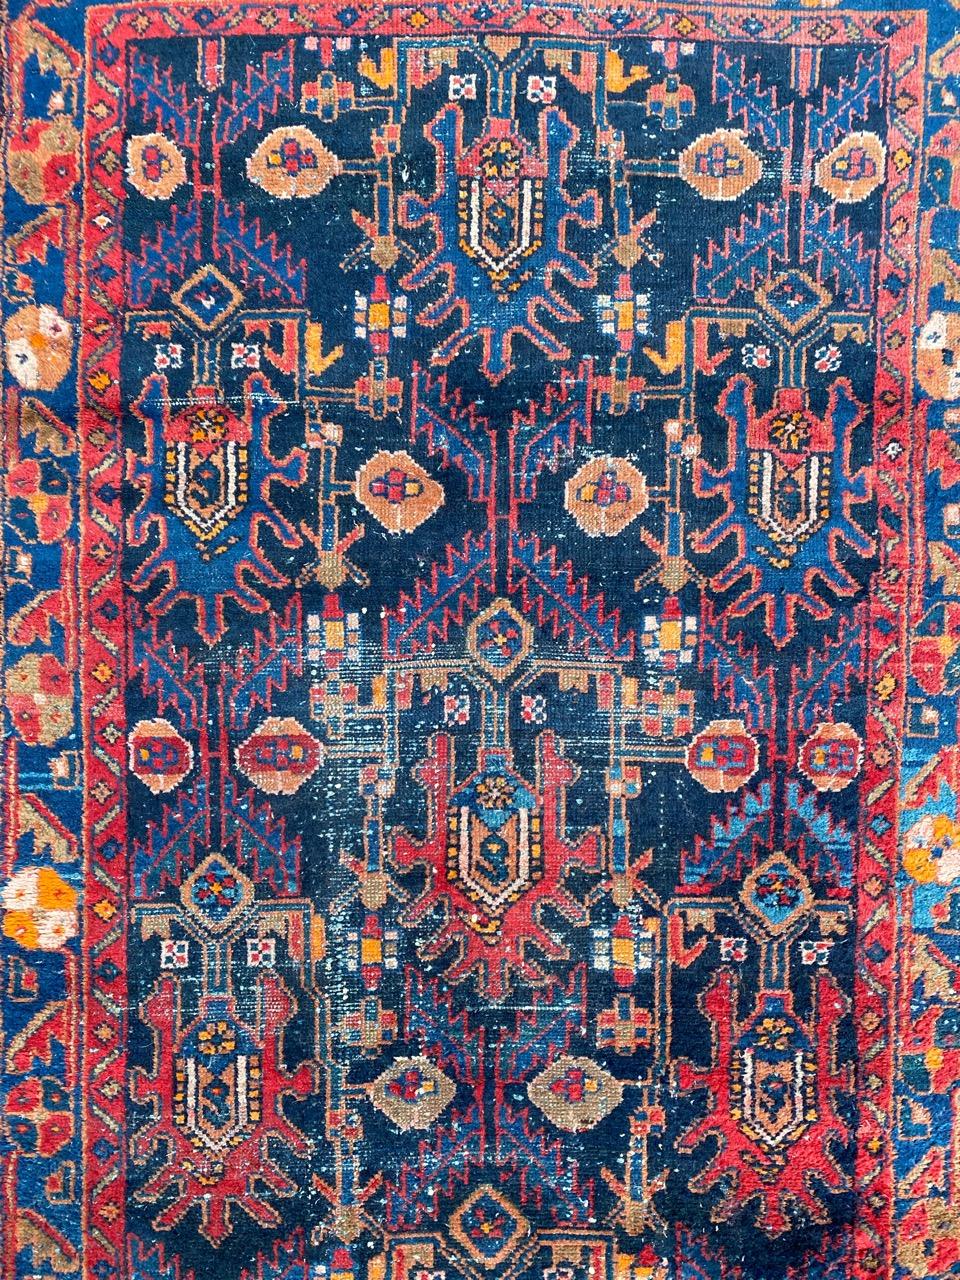 Nice early 20th century rug with beautiful stylised floral design and nice natural colors, entirely hand knotted with wool velvet on cotton foundation.

✨✨✨
